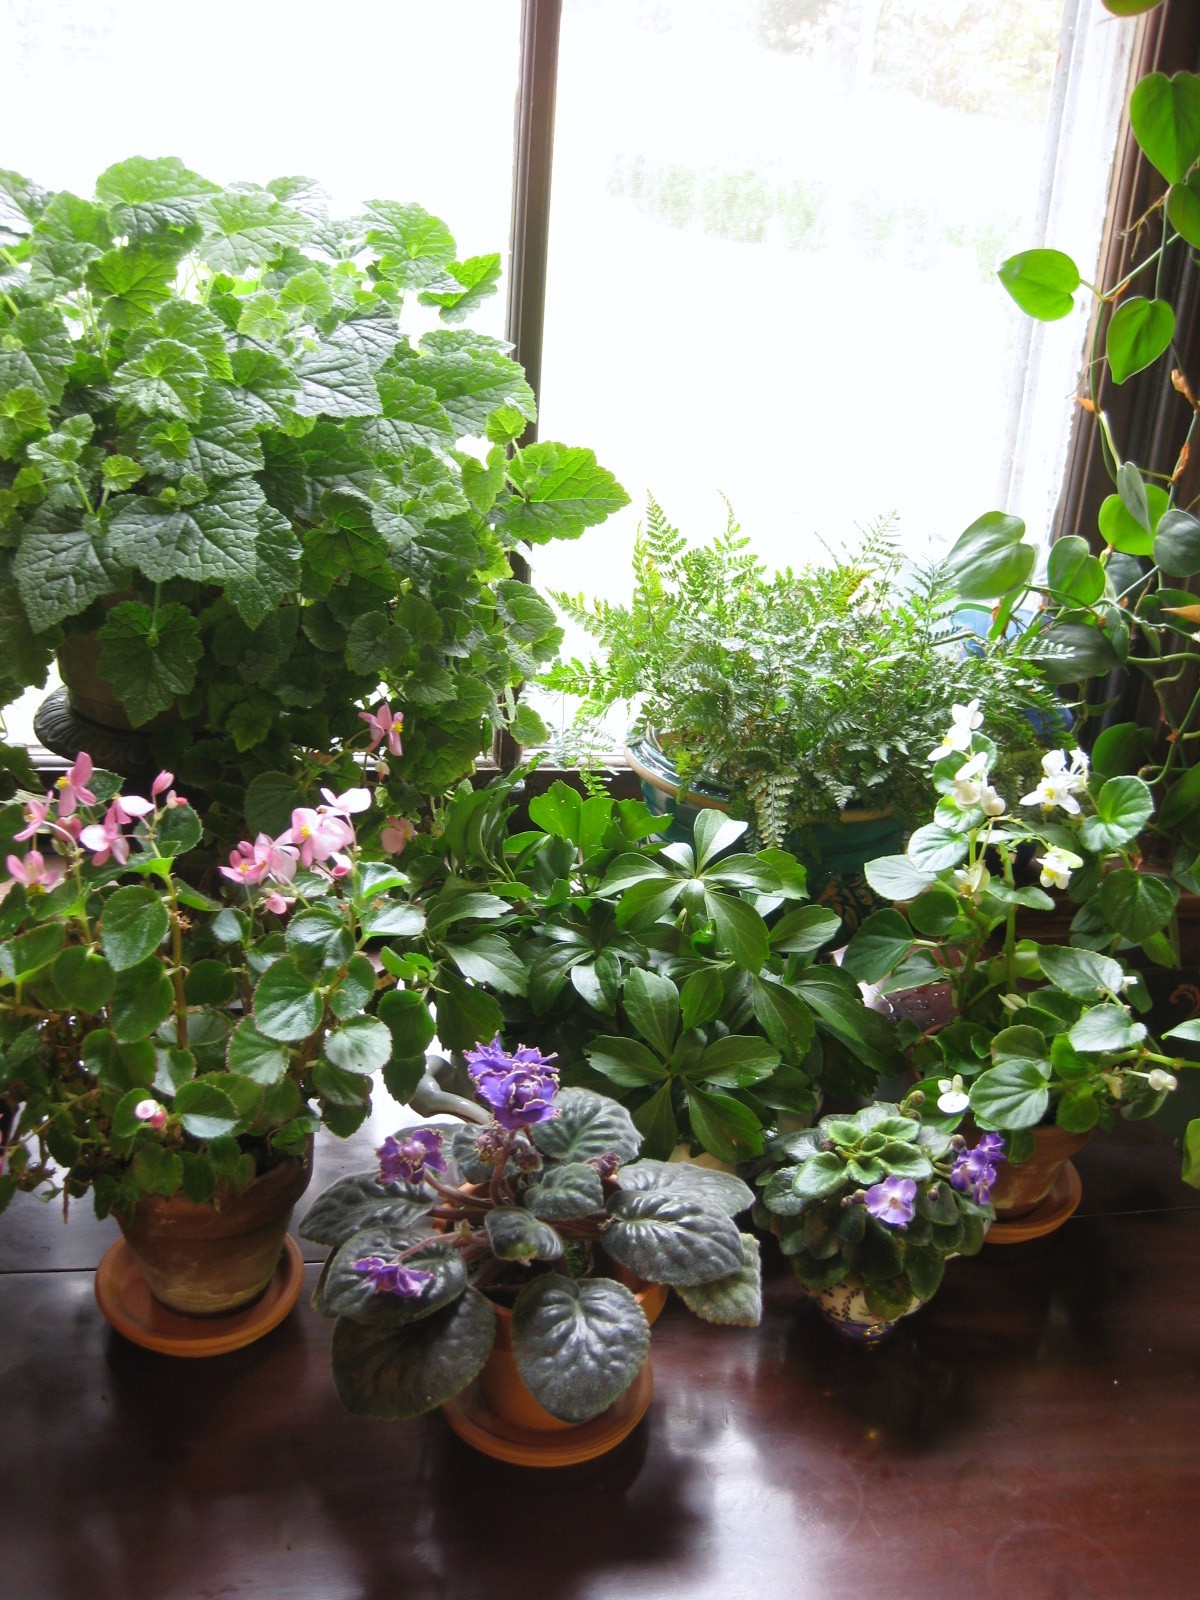 Flowers & Foliage for a Bright North Window